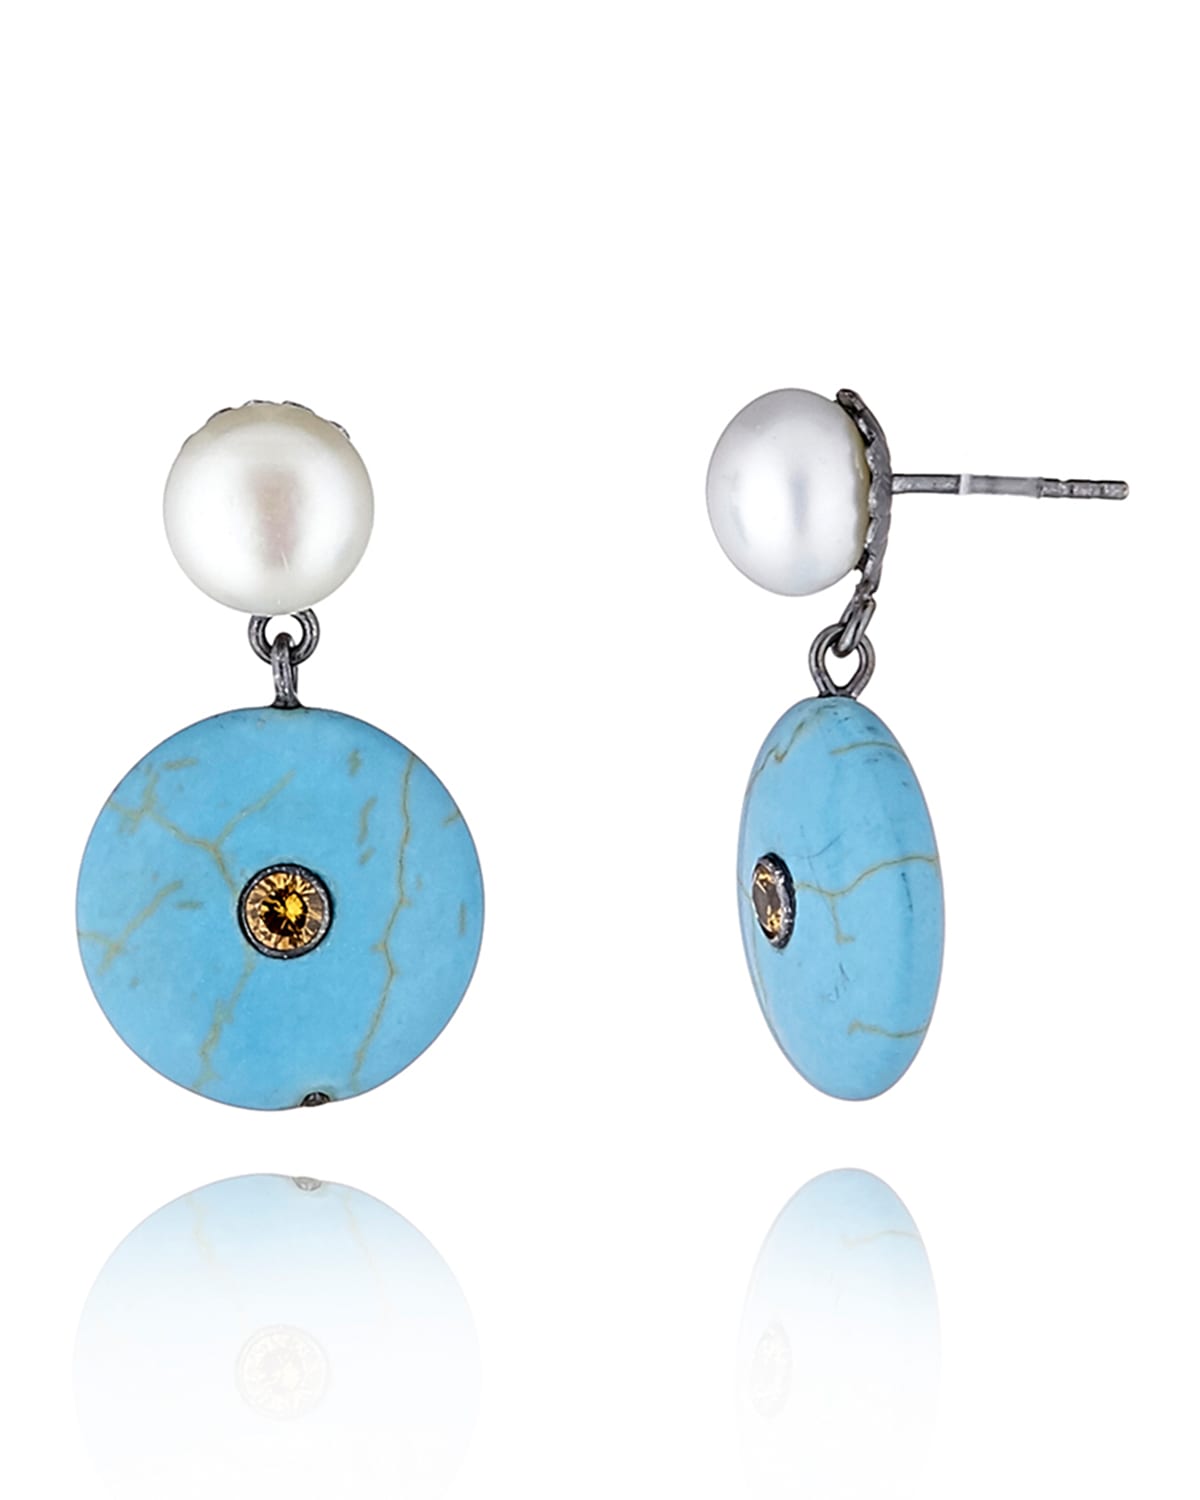 M.c.l By Matthew Campbell Laurenza Pearl & Turquoise Dangle Earrings